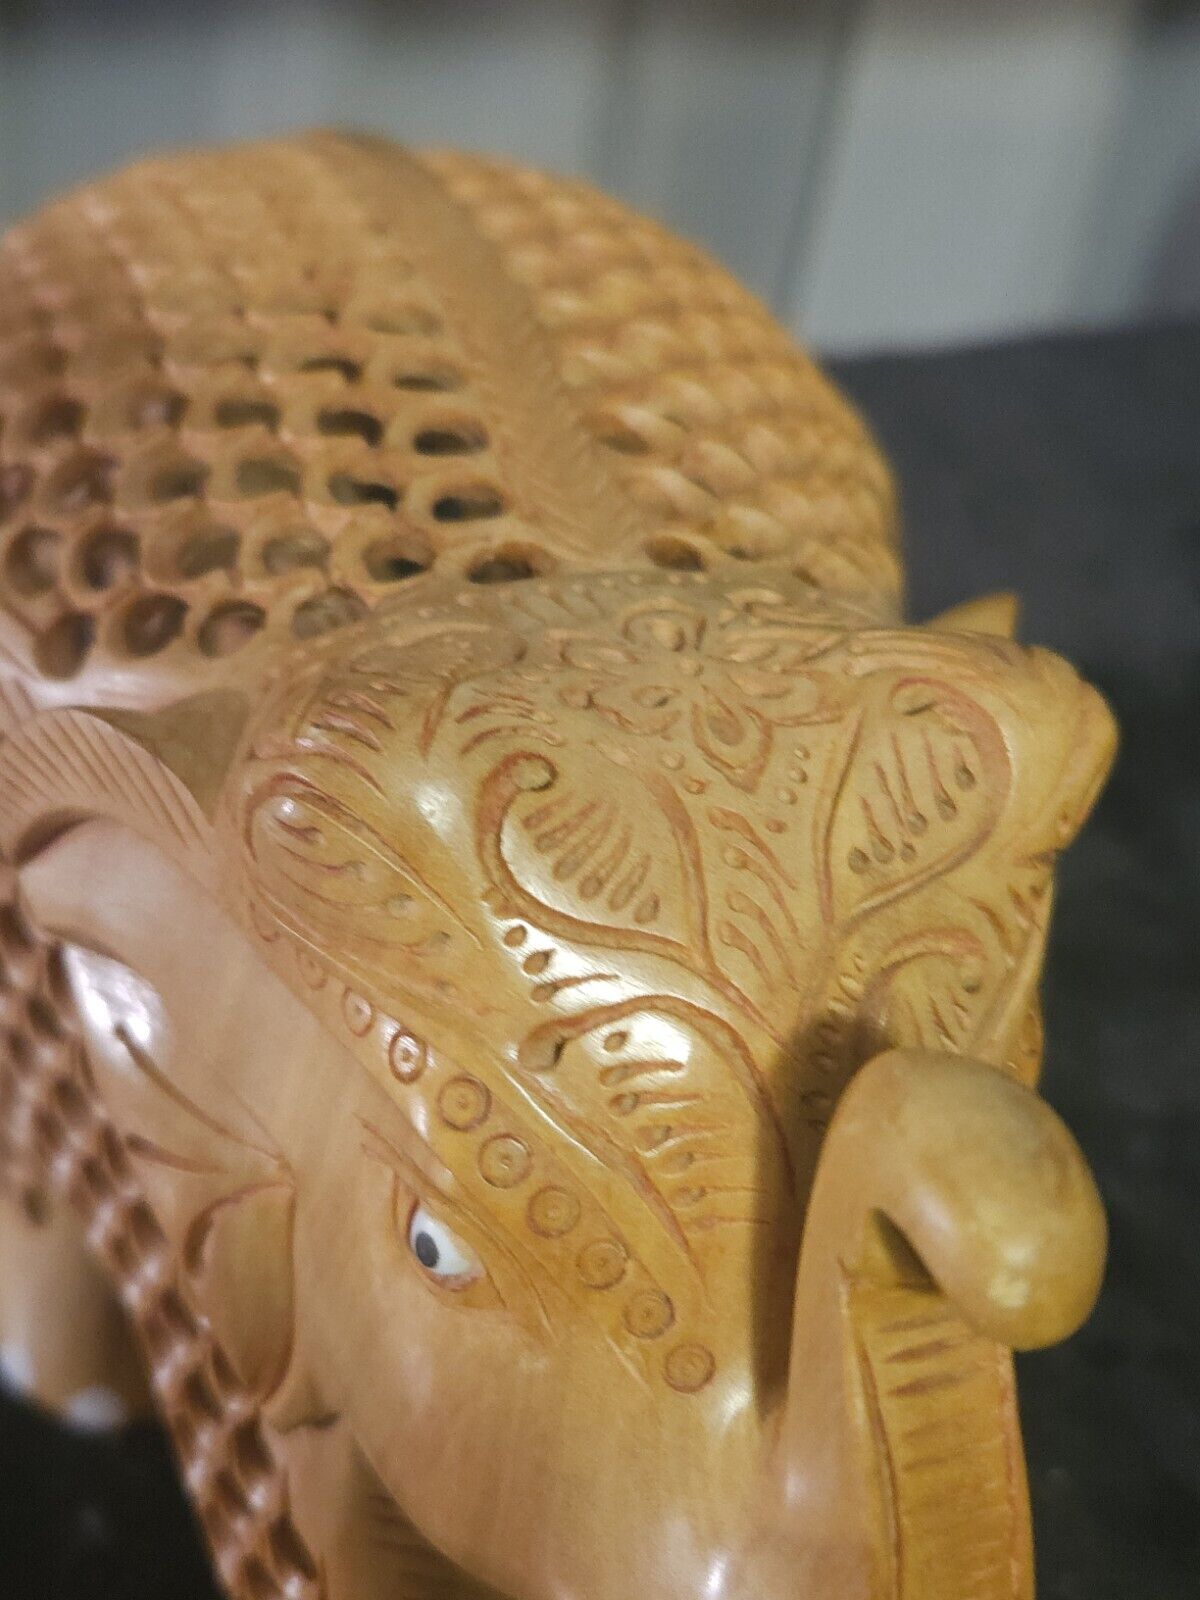 Benzara Hand Carved Wooden Elephant Statue With Cutout Work, Beige India Art Errors & Oddities